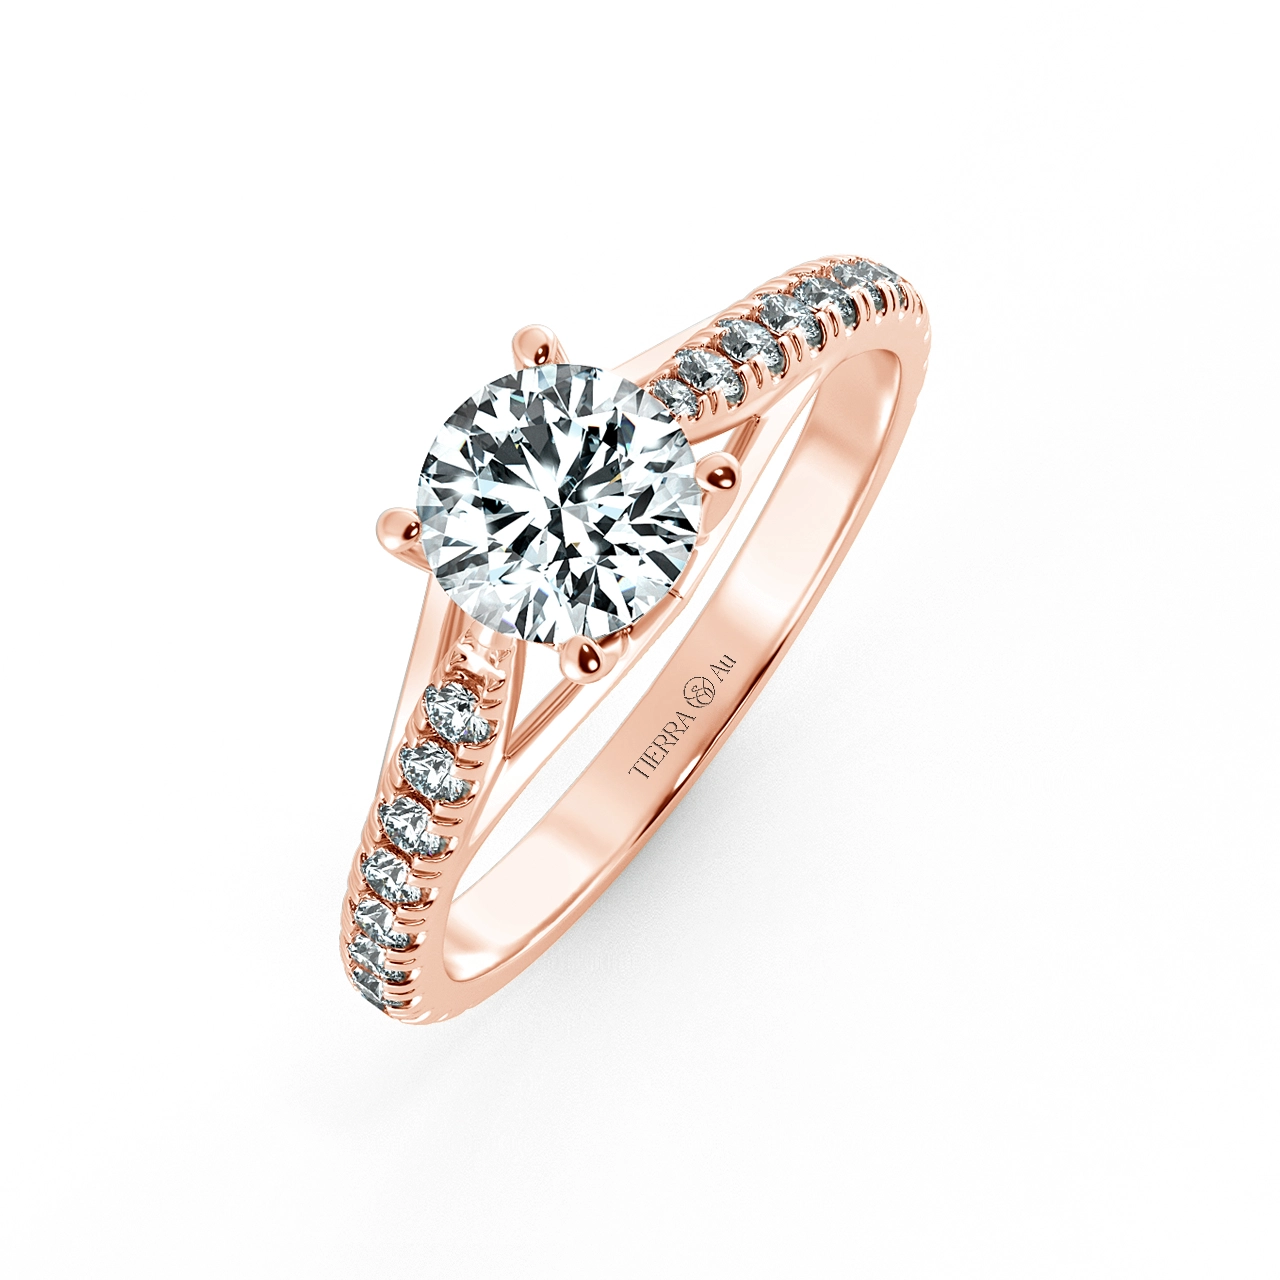 Four Prongs Trellis Engagement Ring with Pave Band and Stylized NCH1406 3